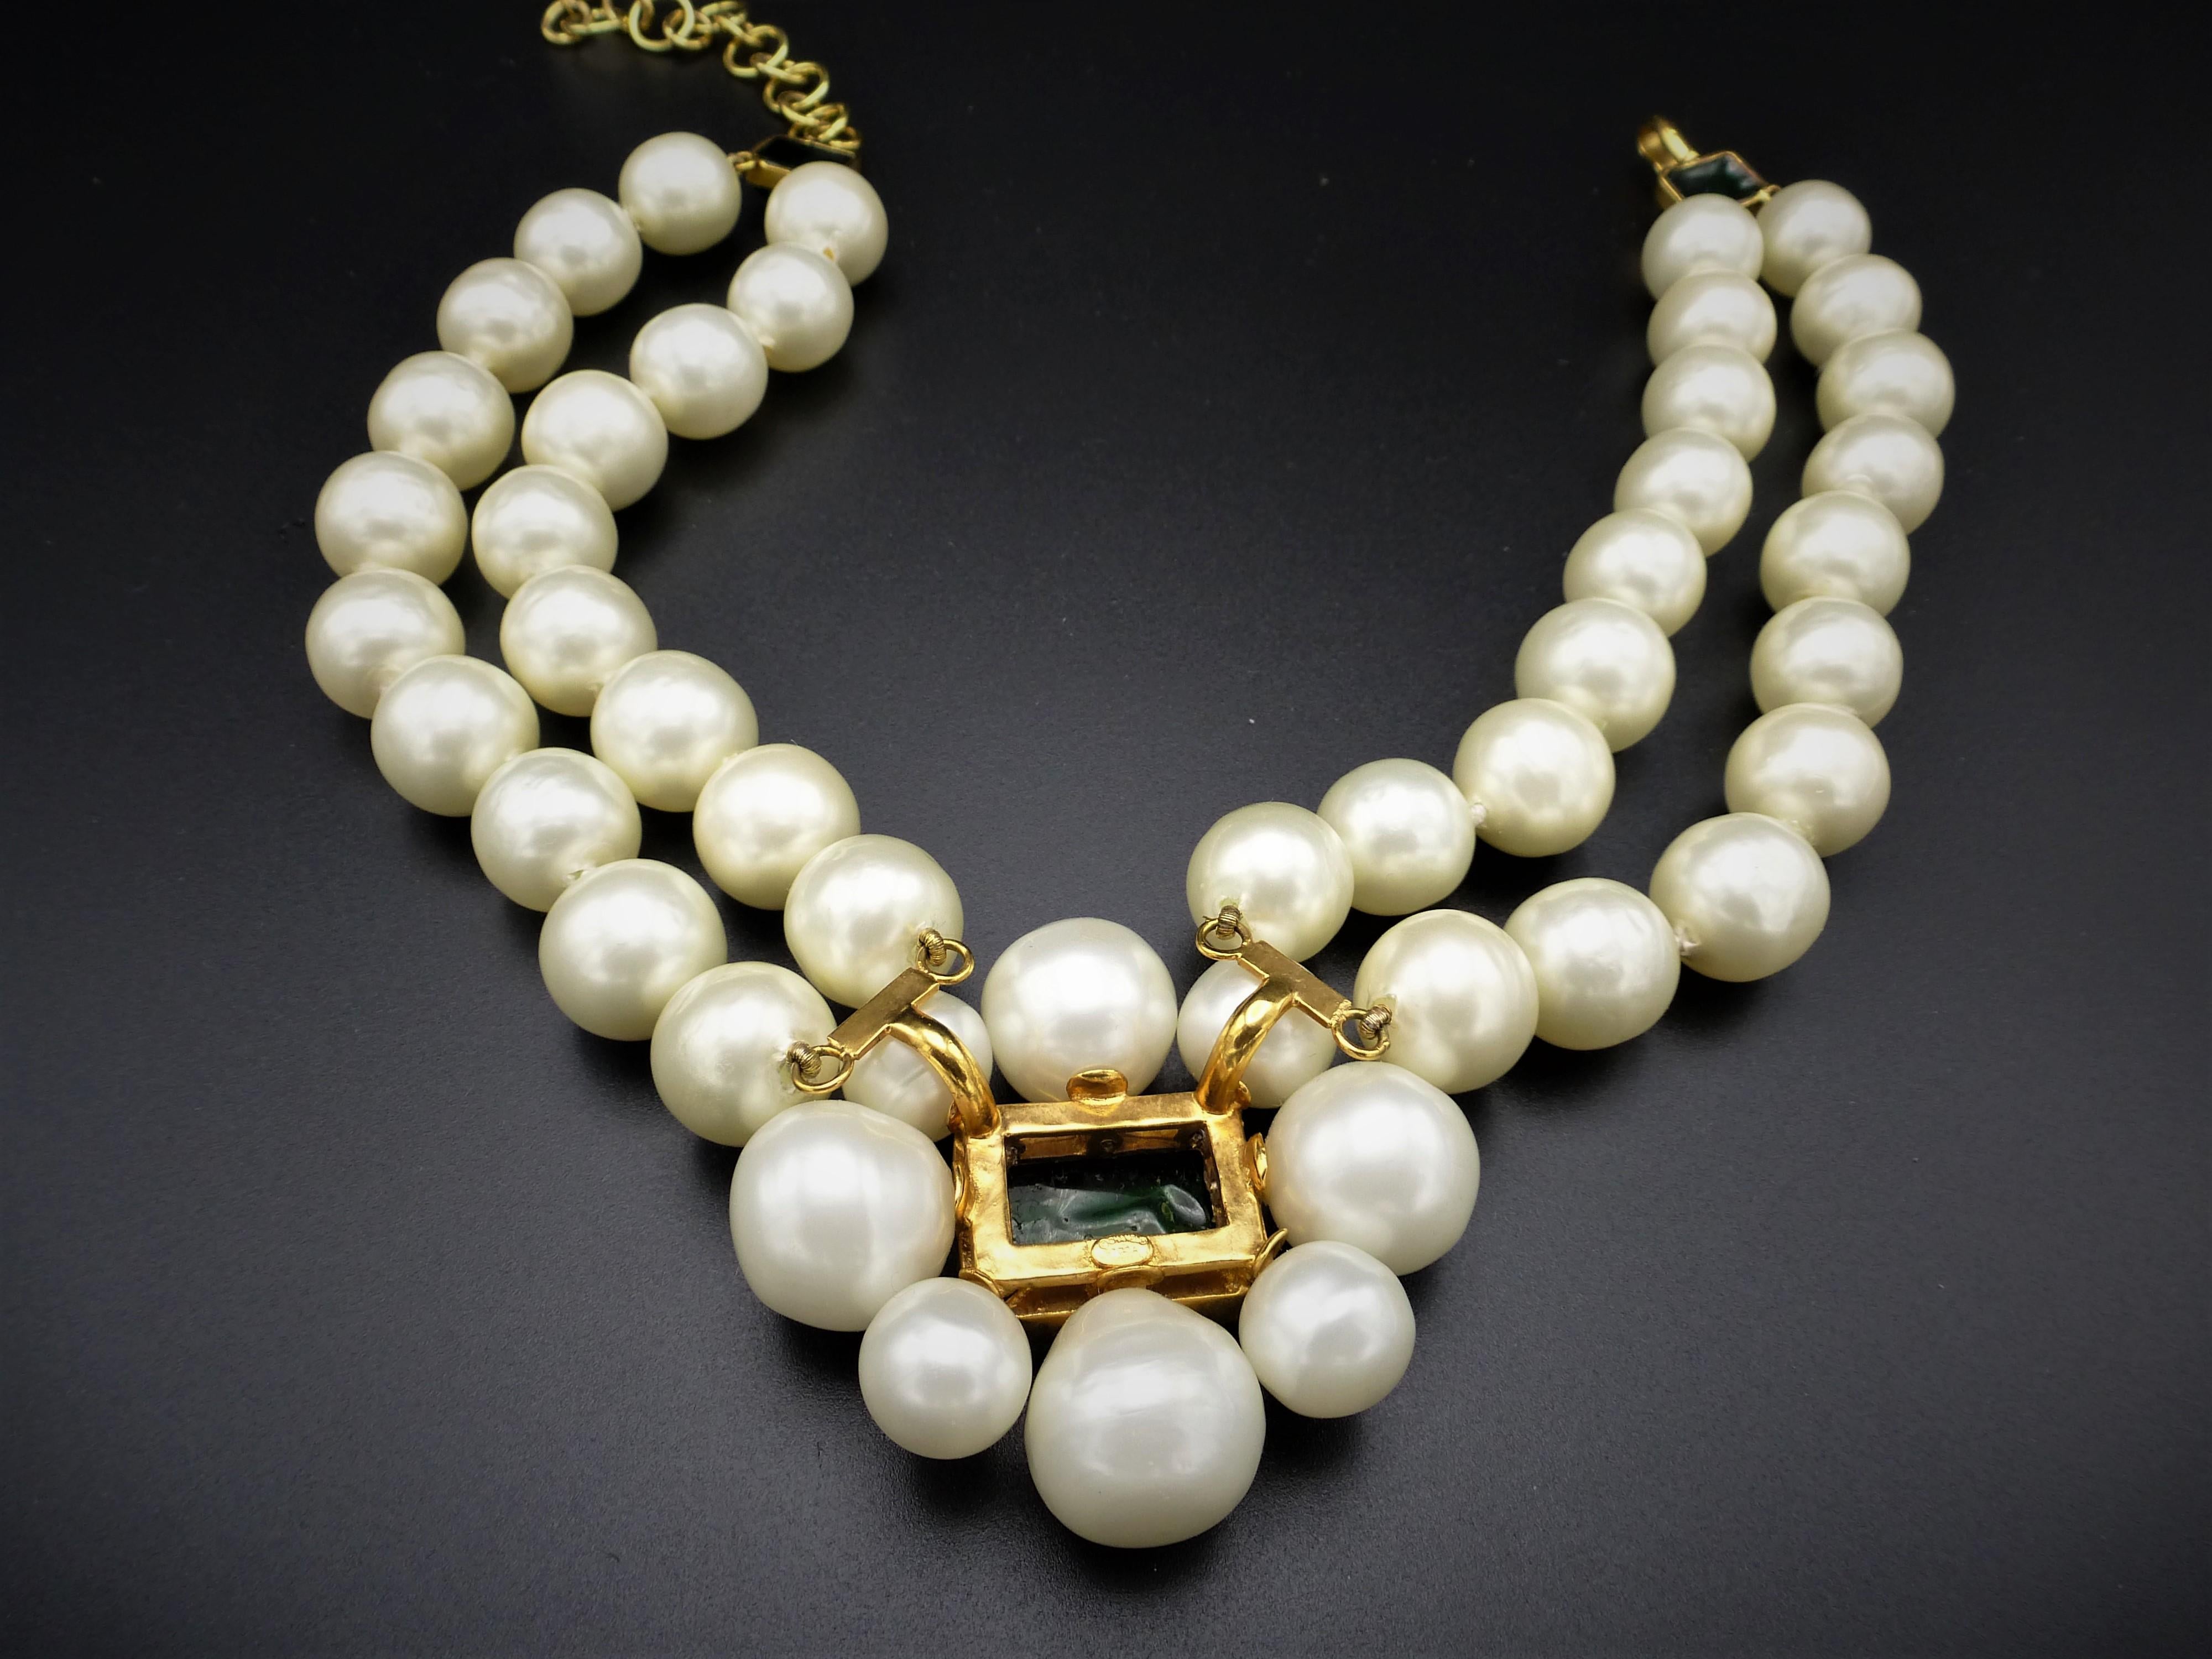 Women's CHANEL 2 row collier with larg pearls,  green Gripoix signed 97A - 1997 Autumn For Sale